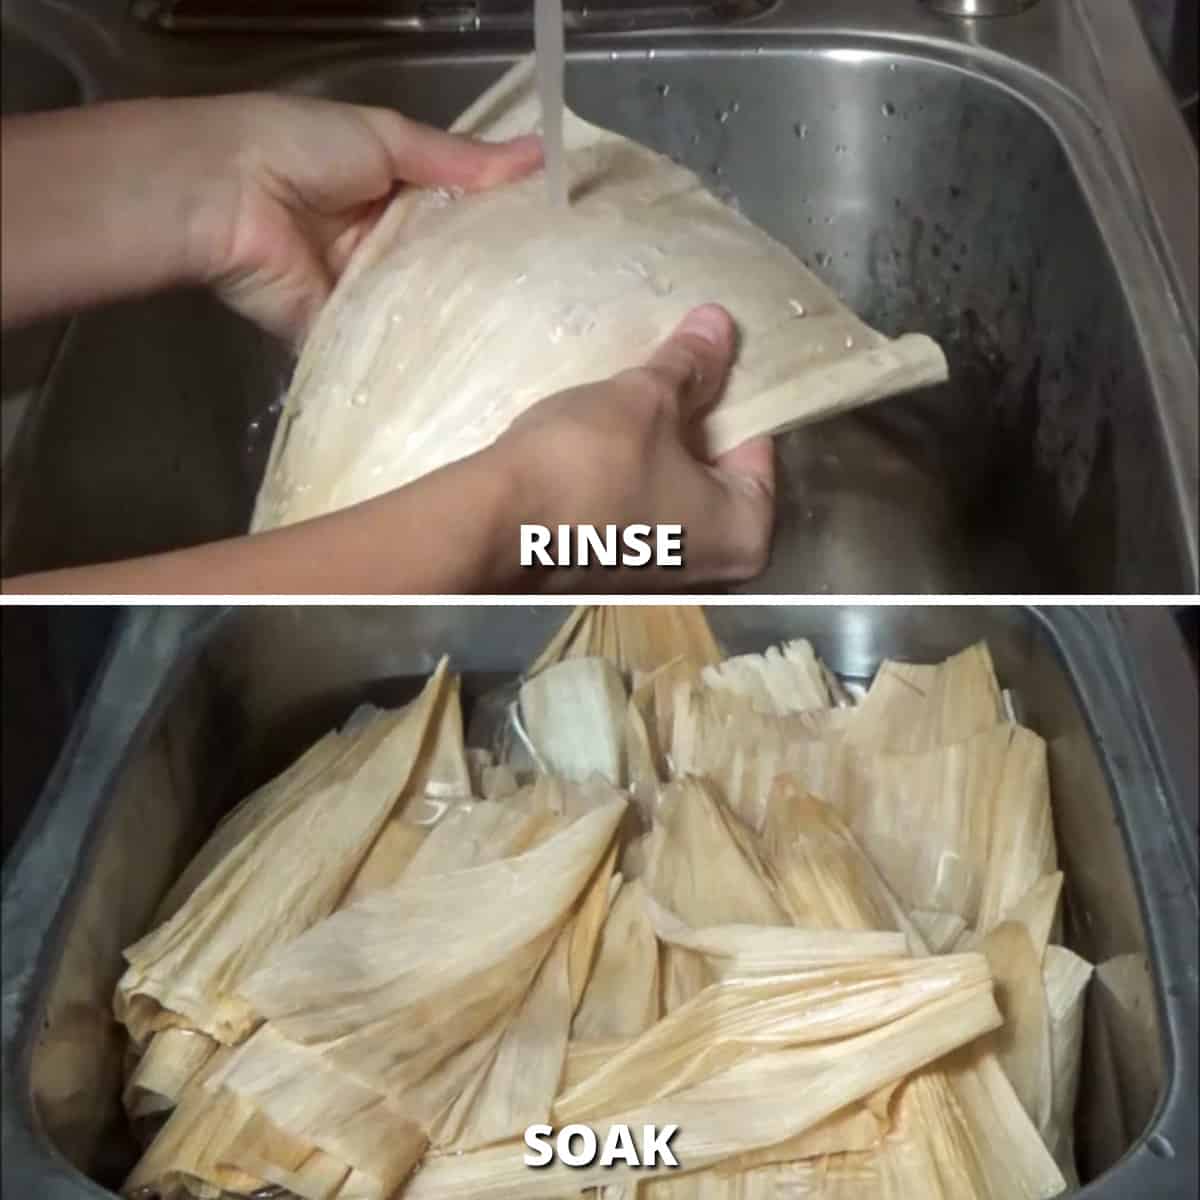 Rinsing and soaking corn husks in a kitchen sink.